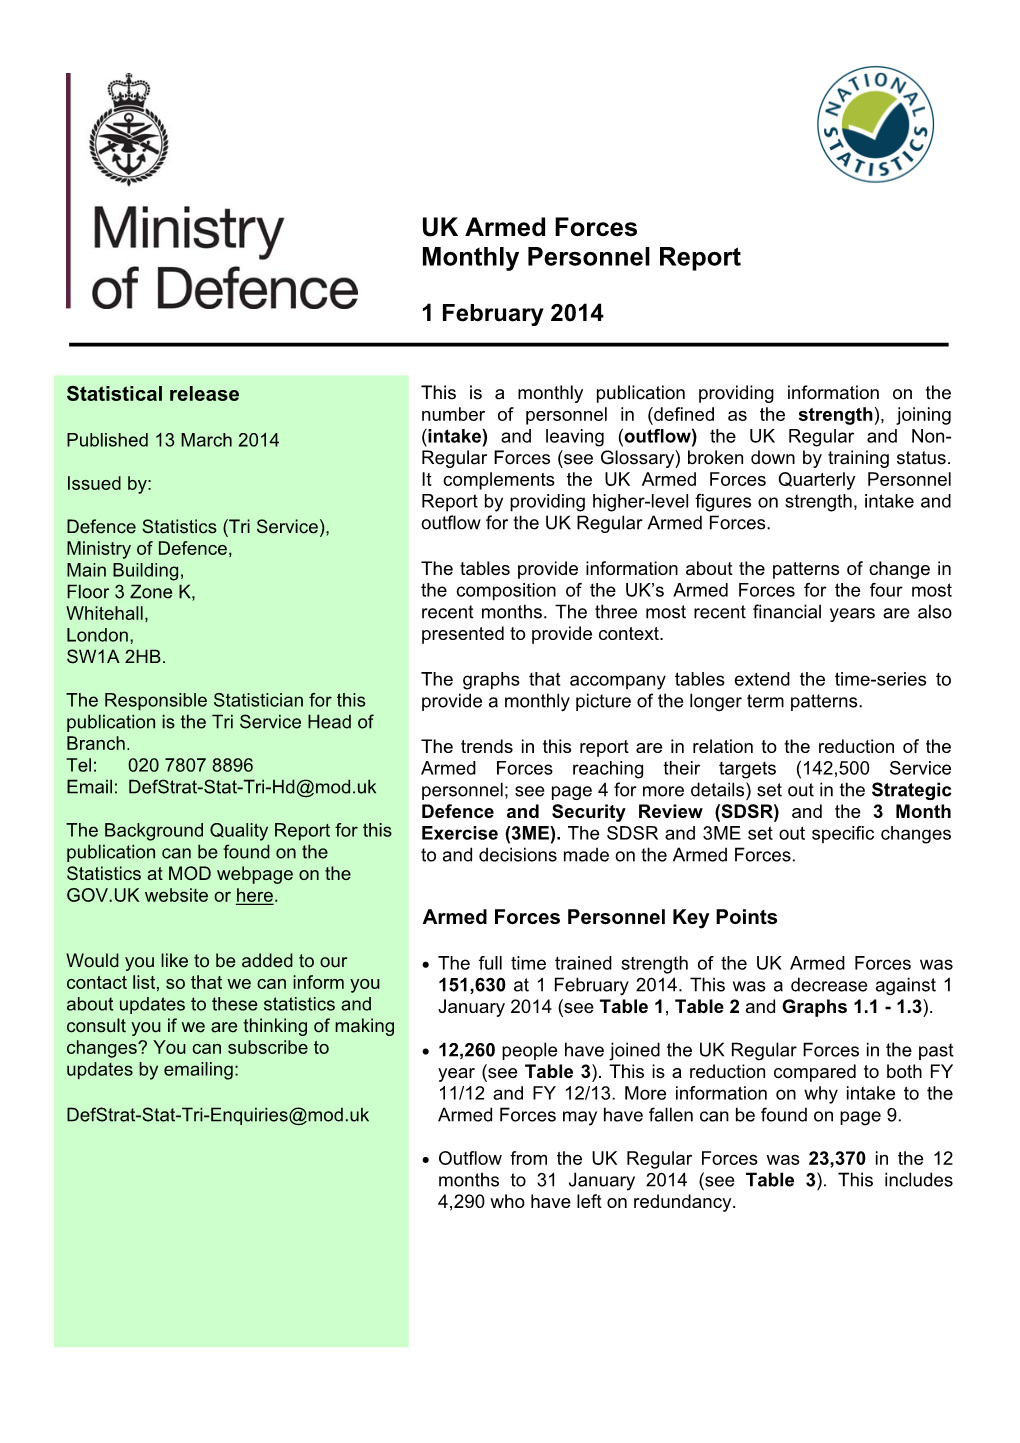 UK Armed Forces Monthly Personnel Report February 2014